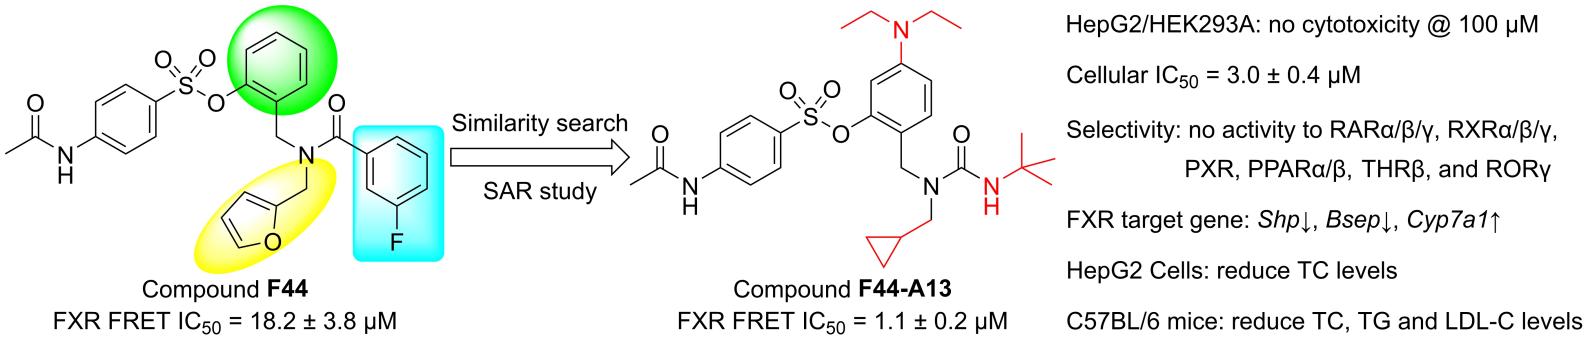 Discovery of novel and selective farnesoid X receptor antagonists through structure-based virtual screening, preliminary structure-activity relationship study, and biological evaluation